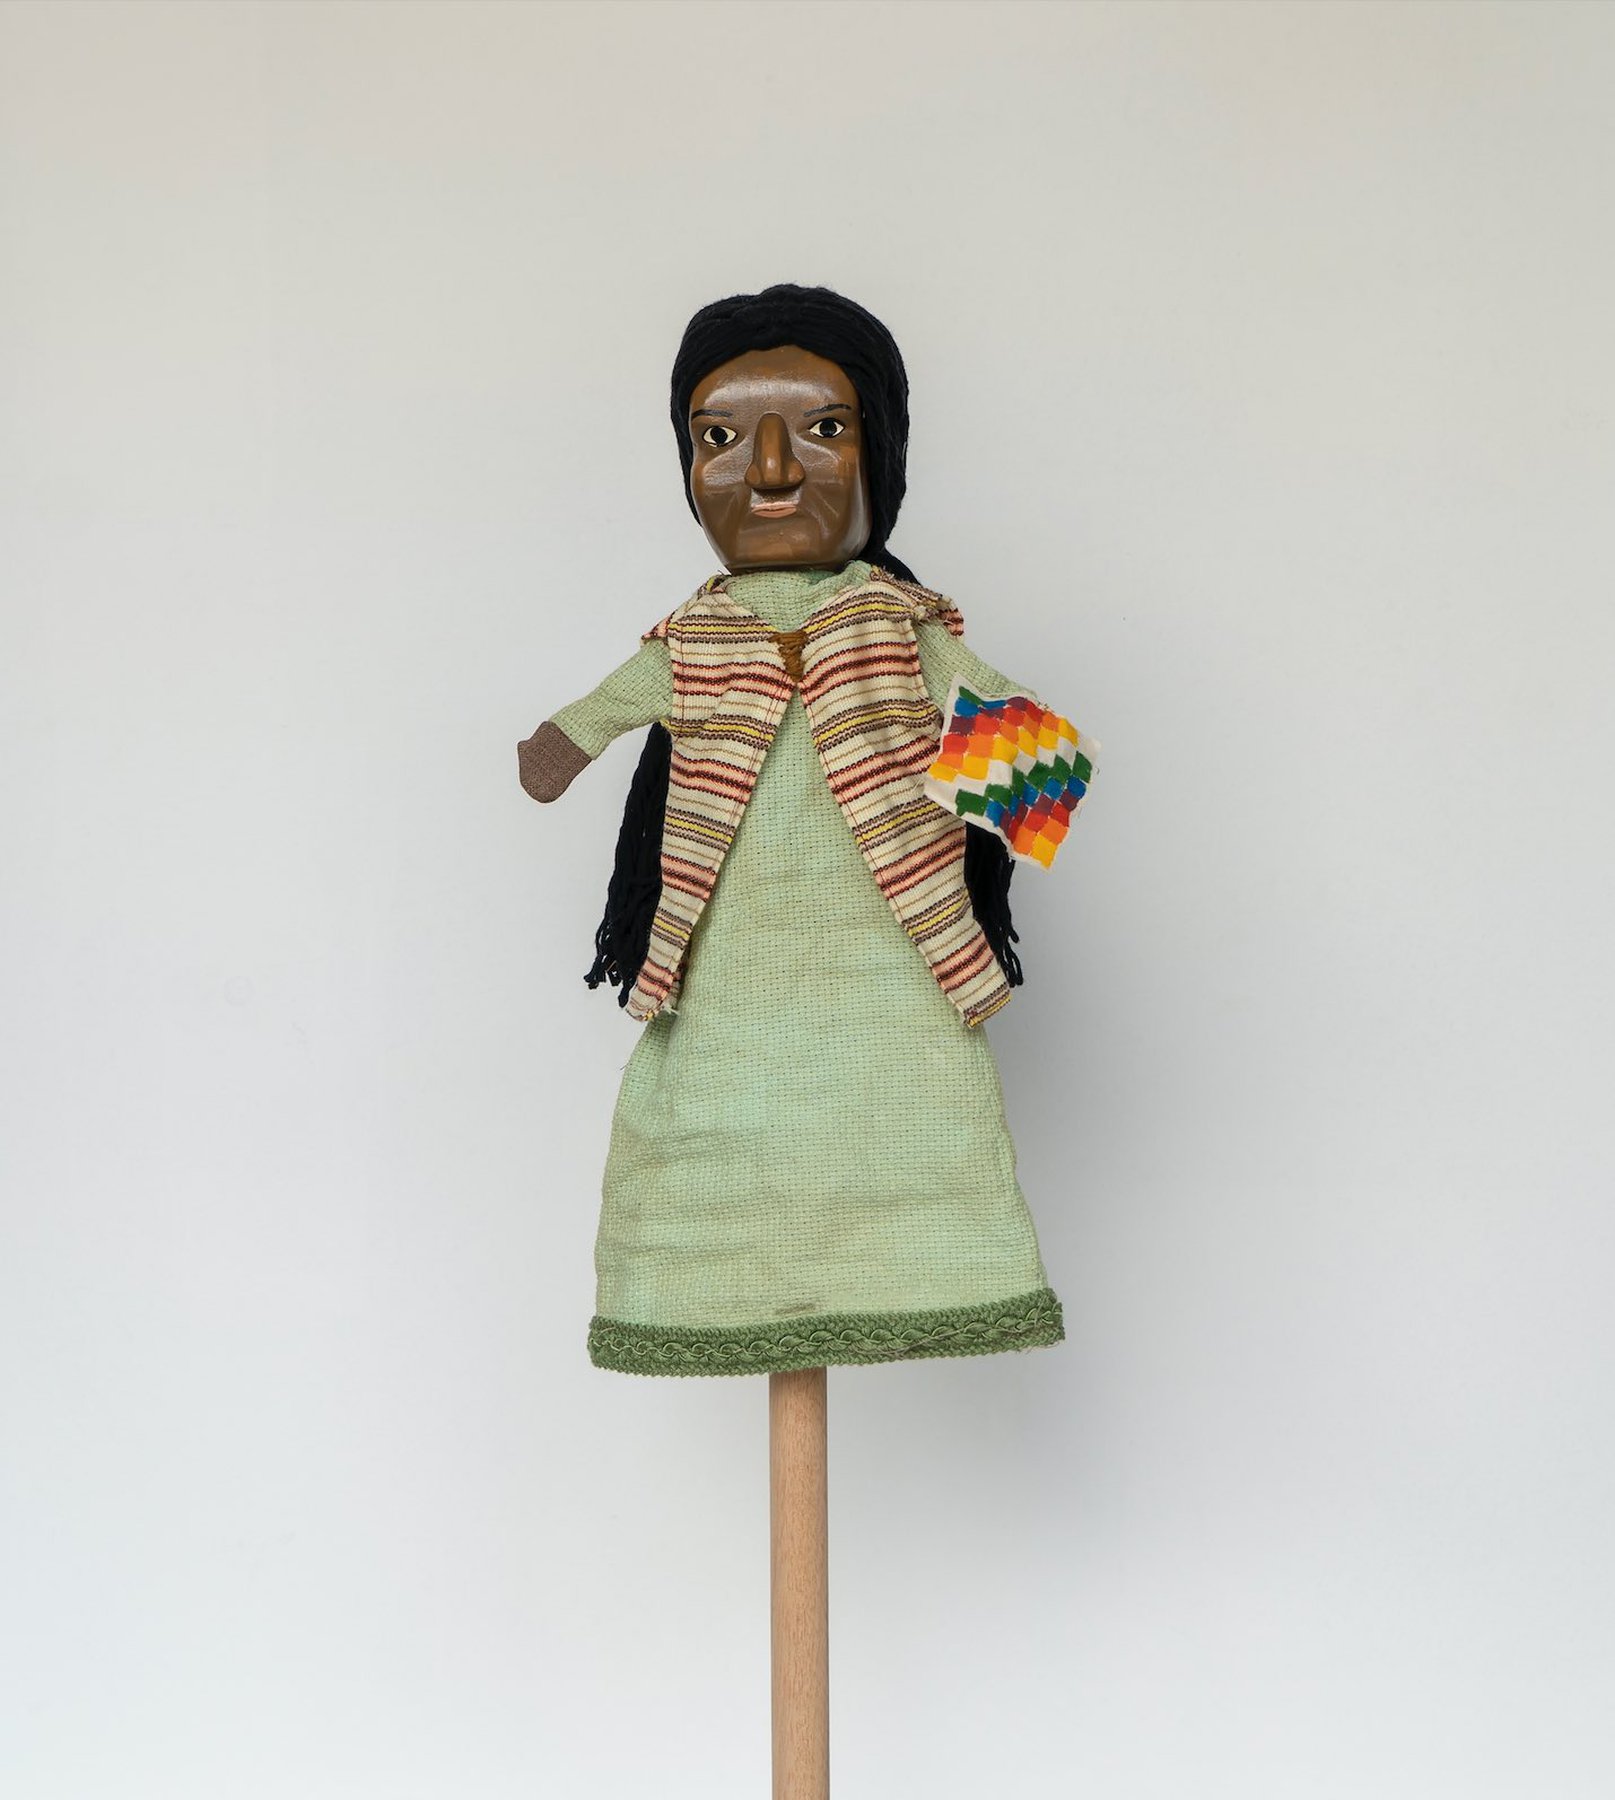 Daniela Ortiz, The Brightness of Greedy Europe, 2022, wood hand-carved, sewn, knitted and embroidered costumes (25 cm) puppet - Milagro Sala